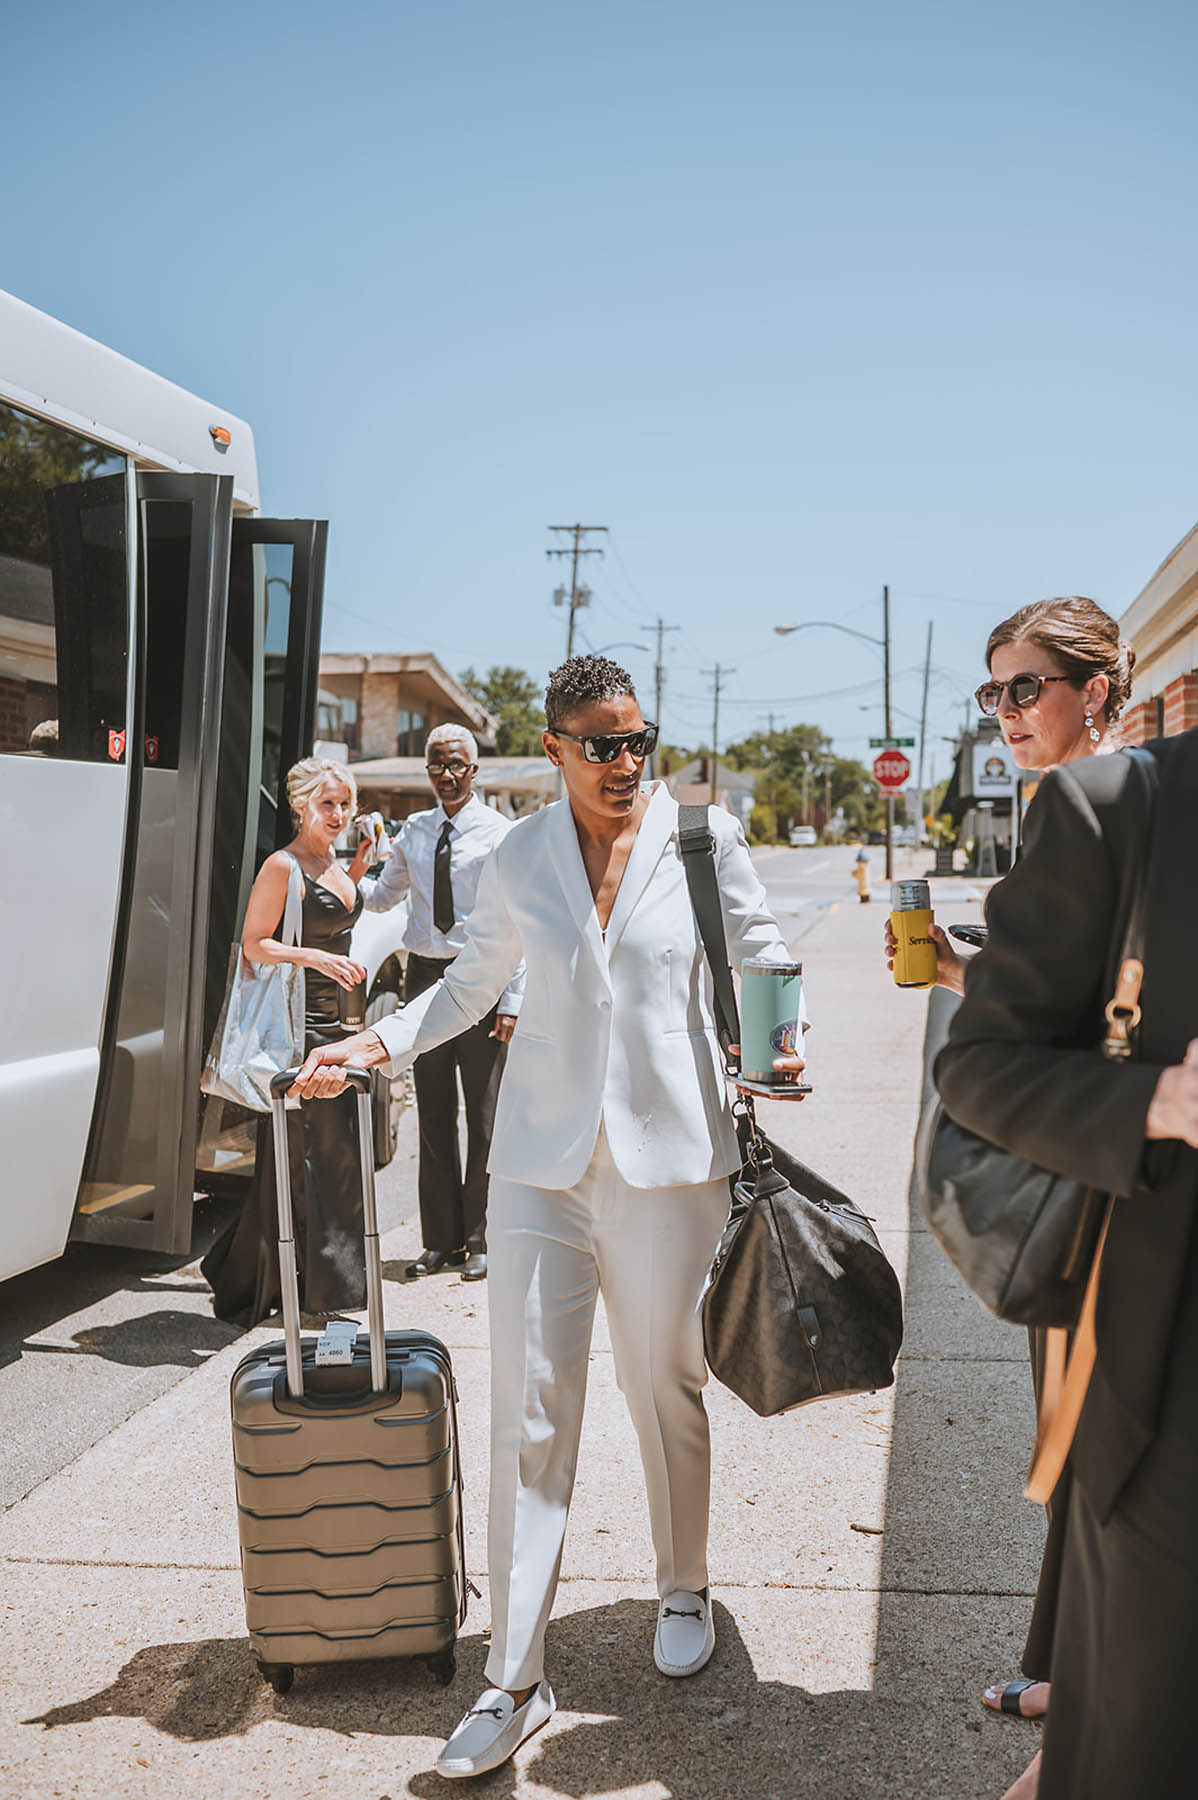 One of the marriers arrives off a party bus, wearing sunglasses and a sleek white suit and carrying luggage.